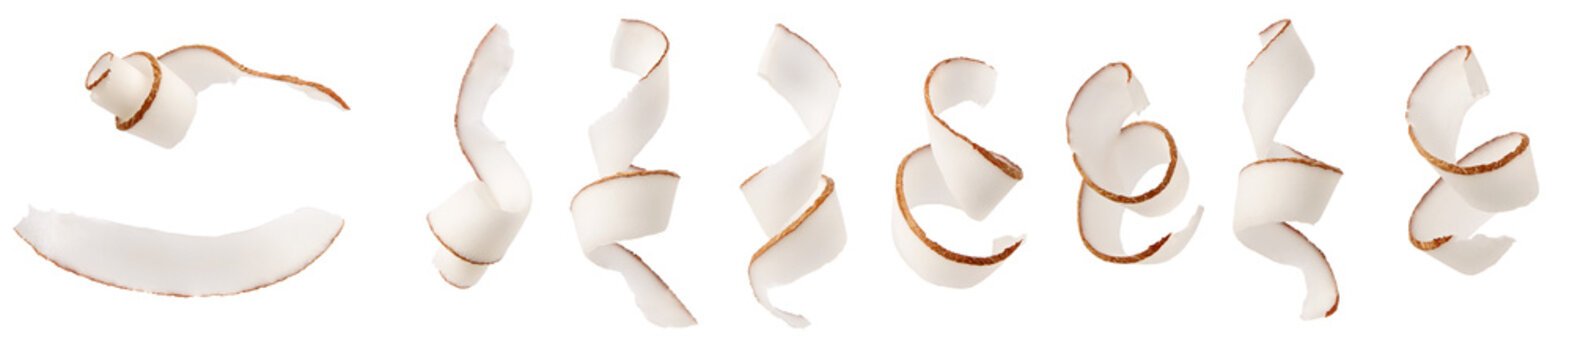 Coconut spiral curl slices set isolated on white background